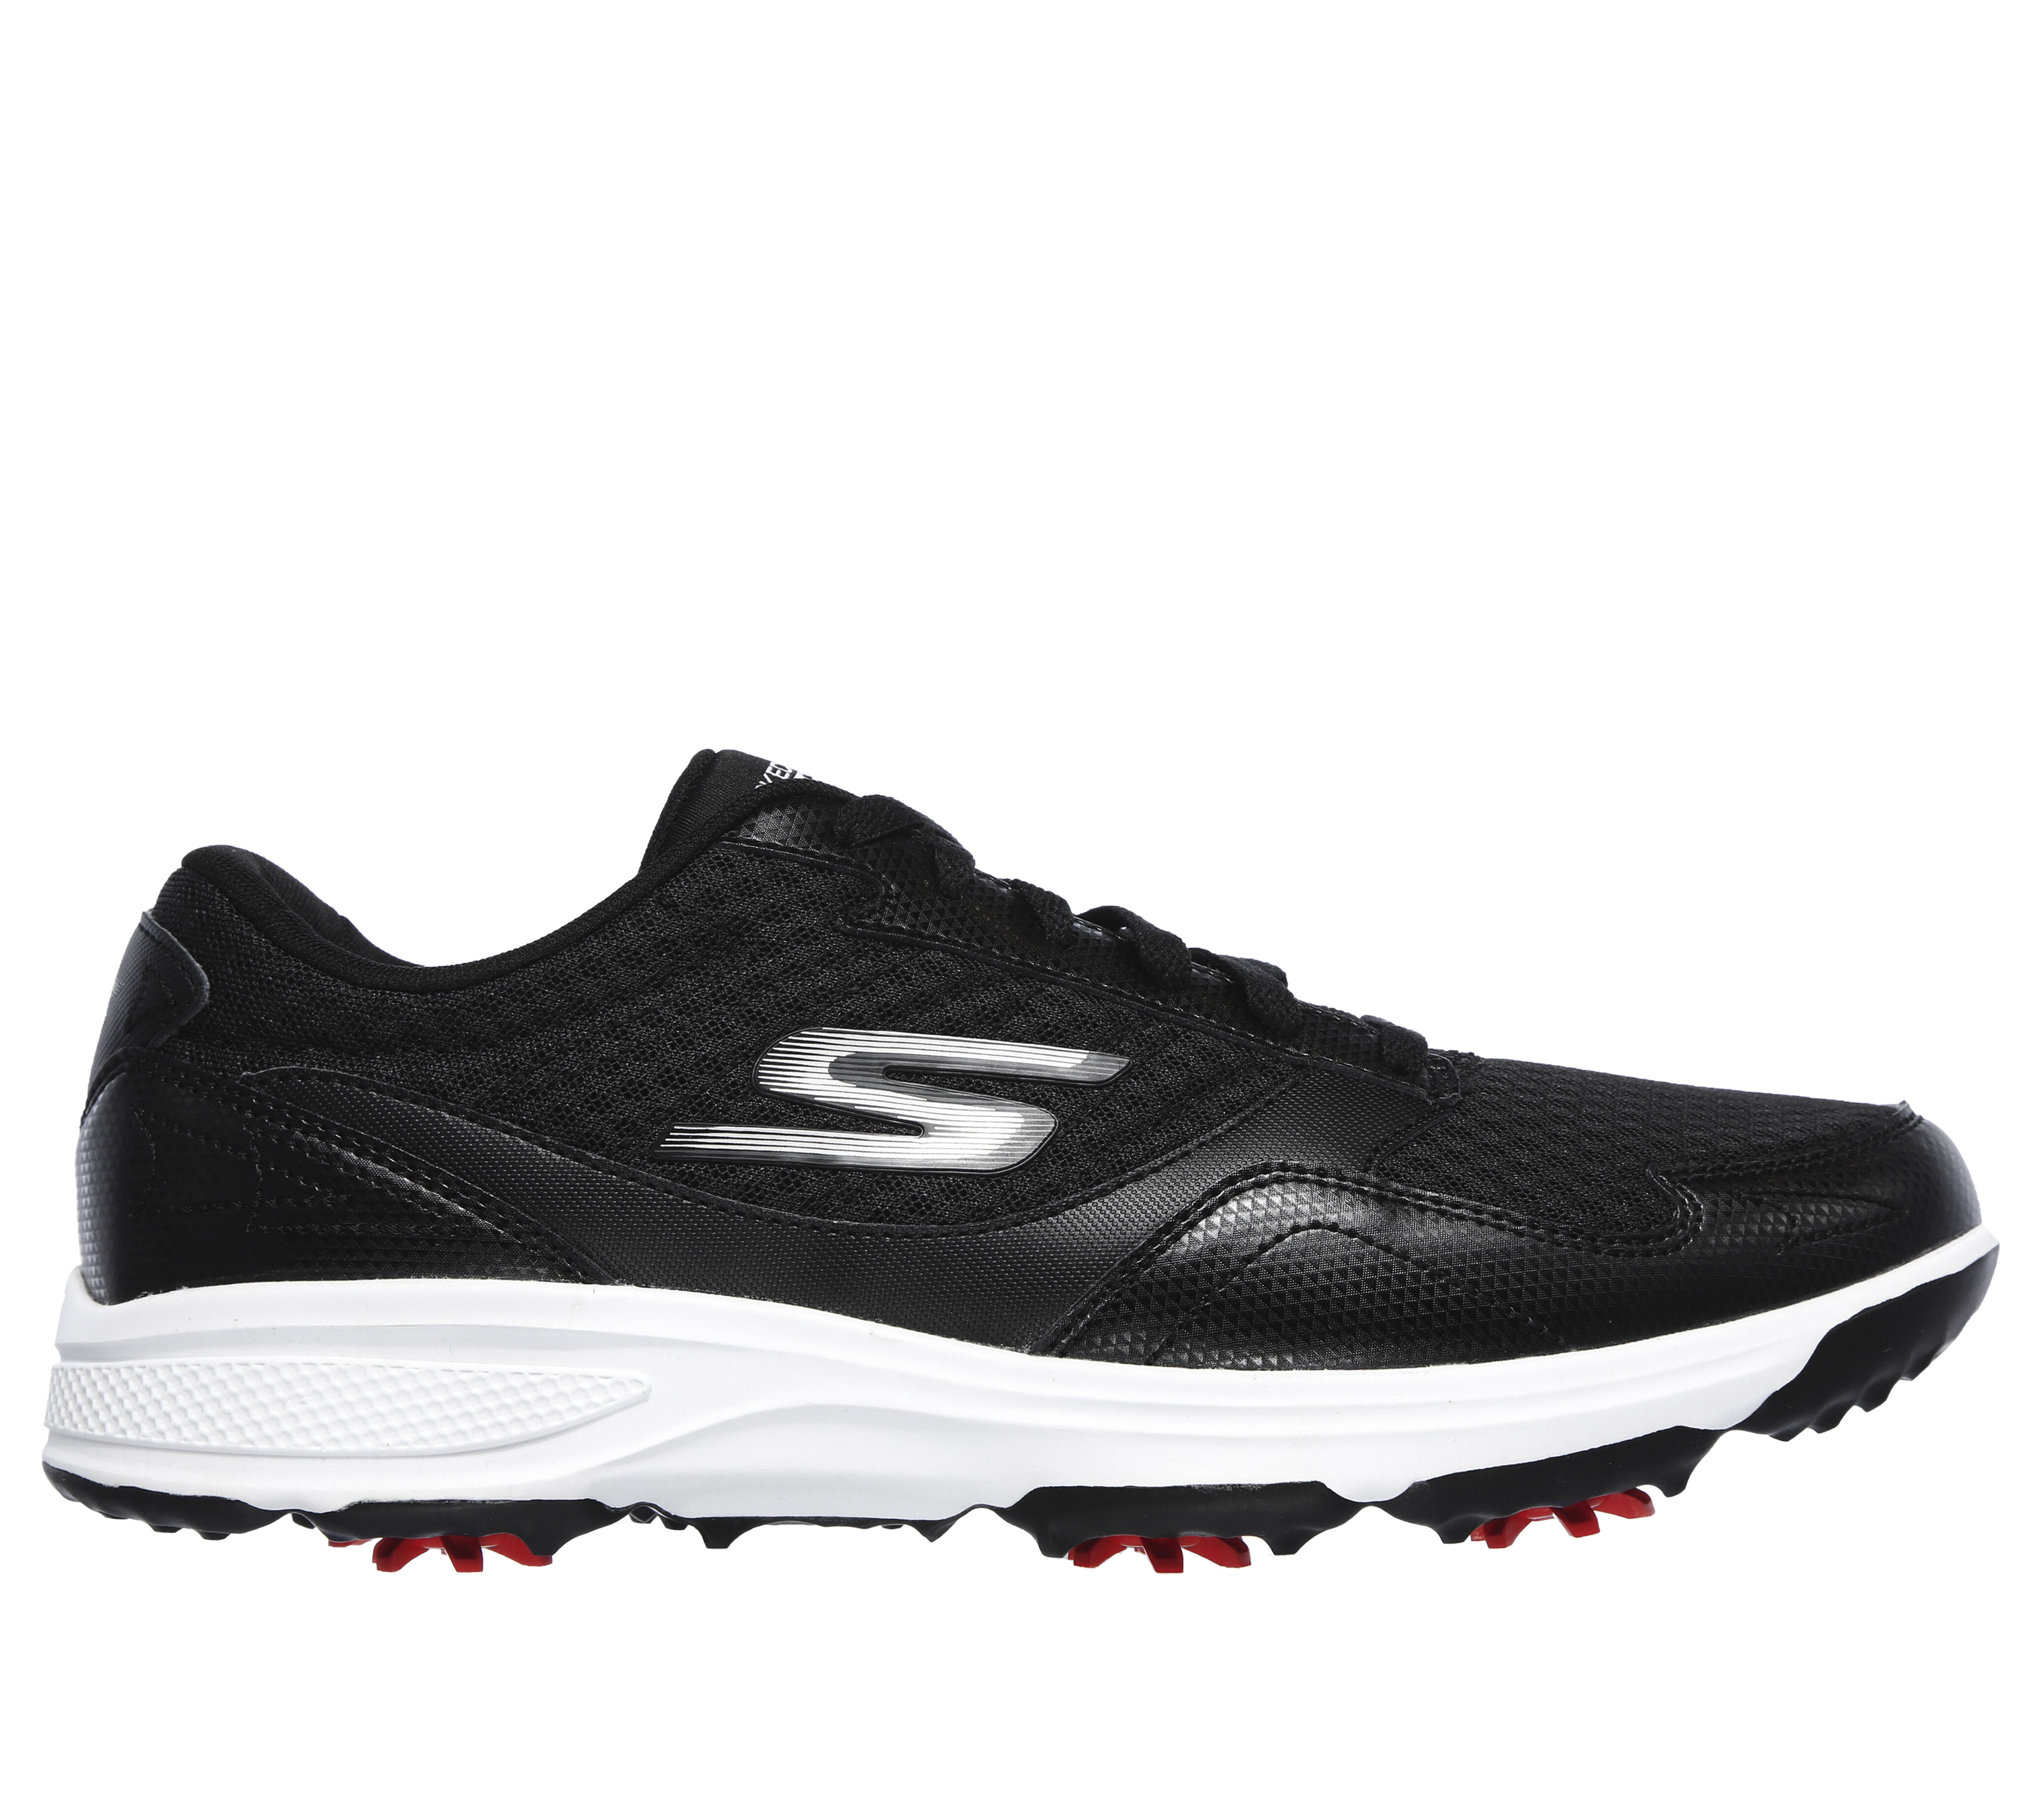 skechers golf shoes size 13